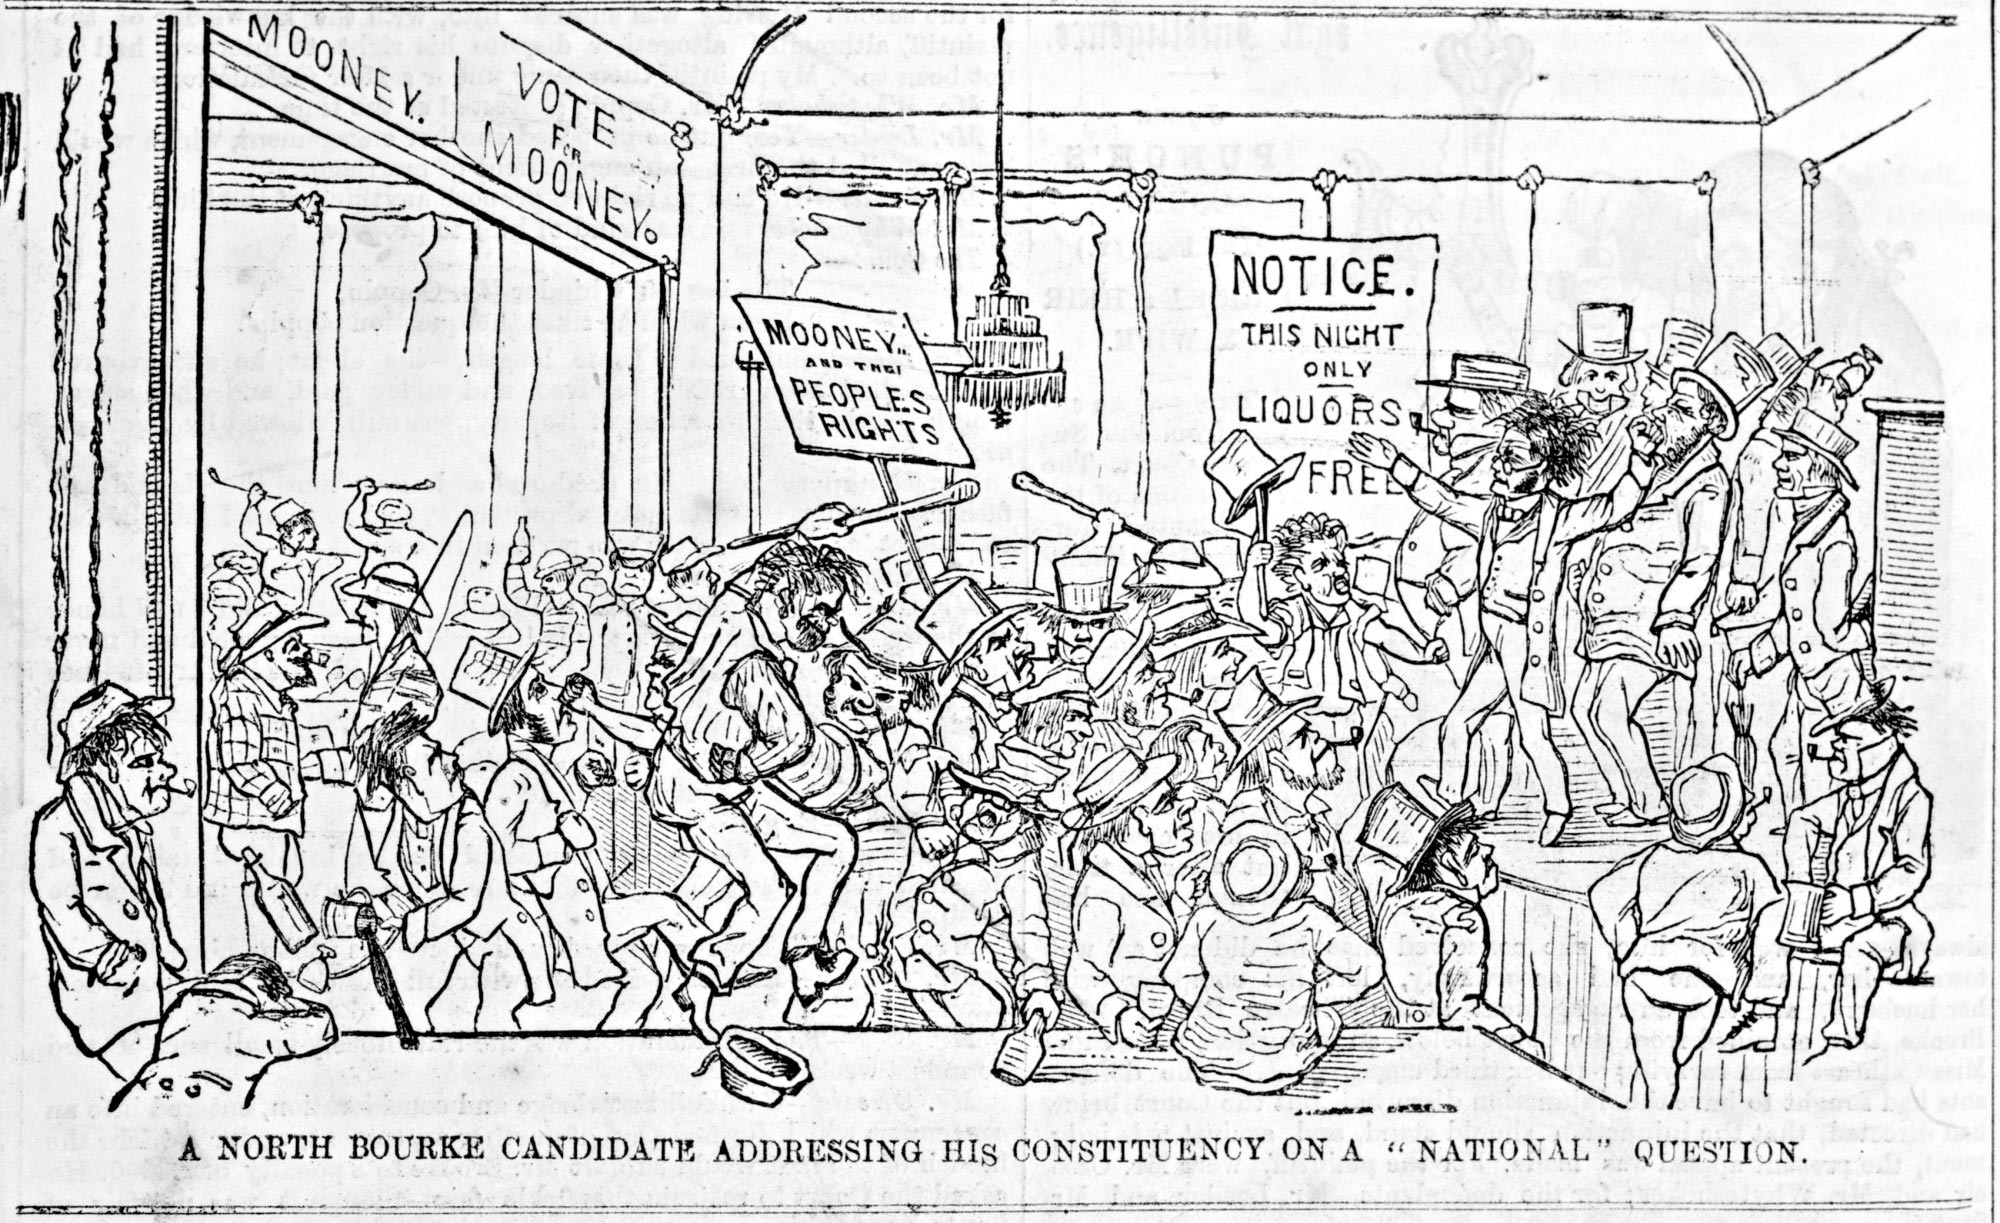 Electioneering in the pub, published by Edgar Ray and Frederick Sinnett, 1855.